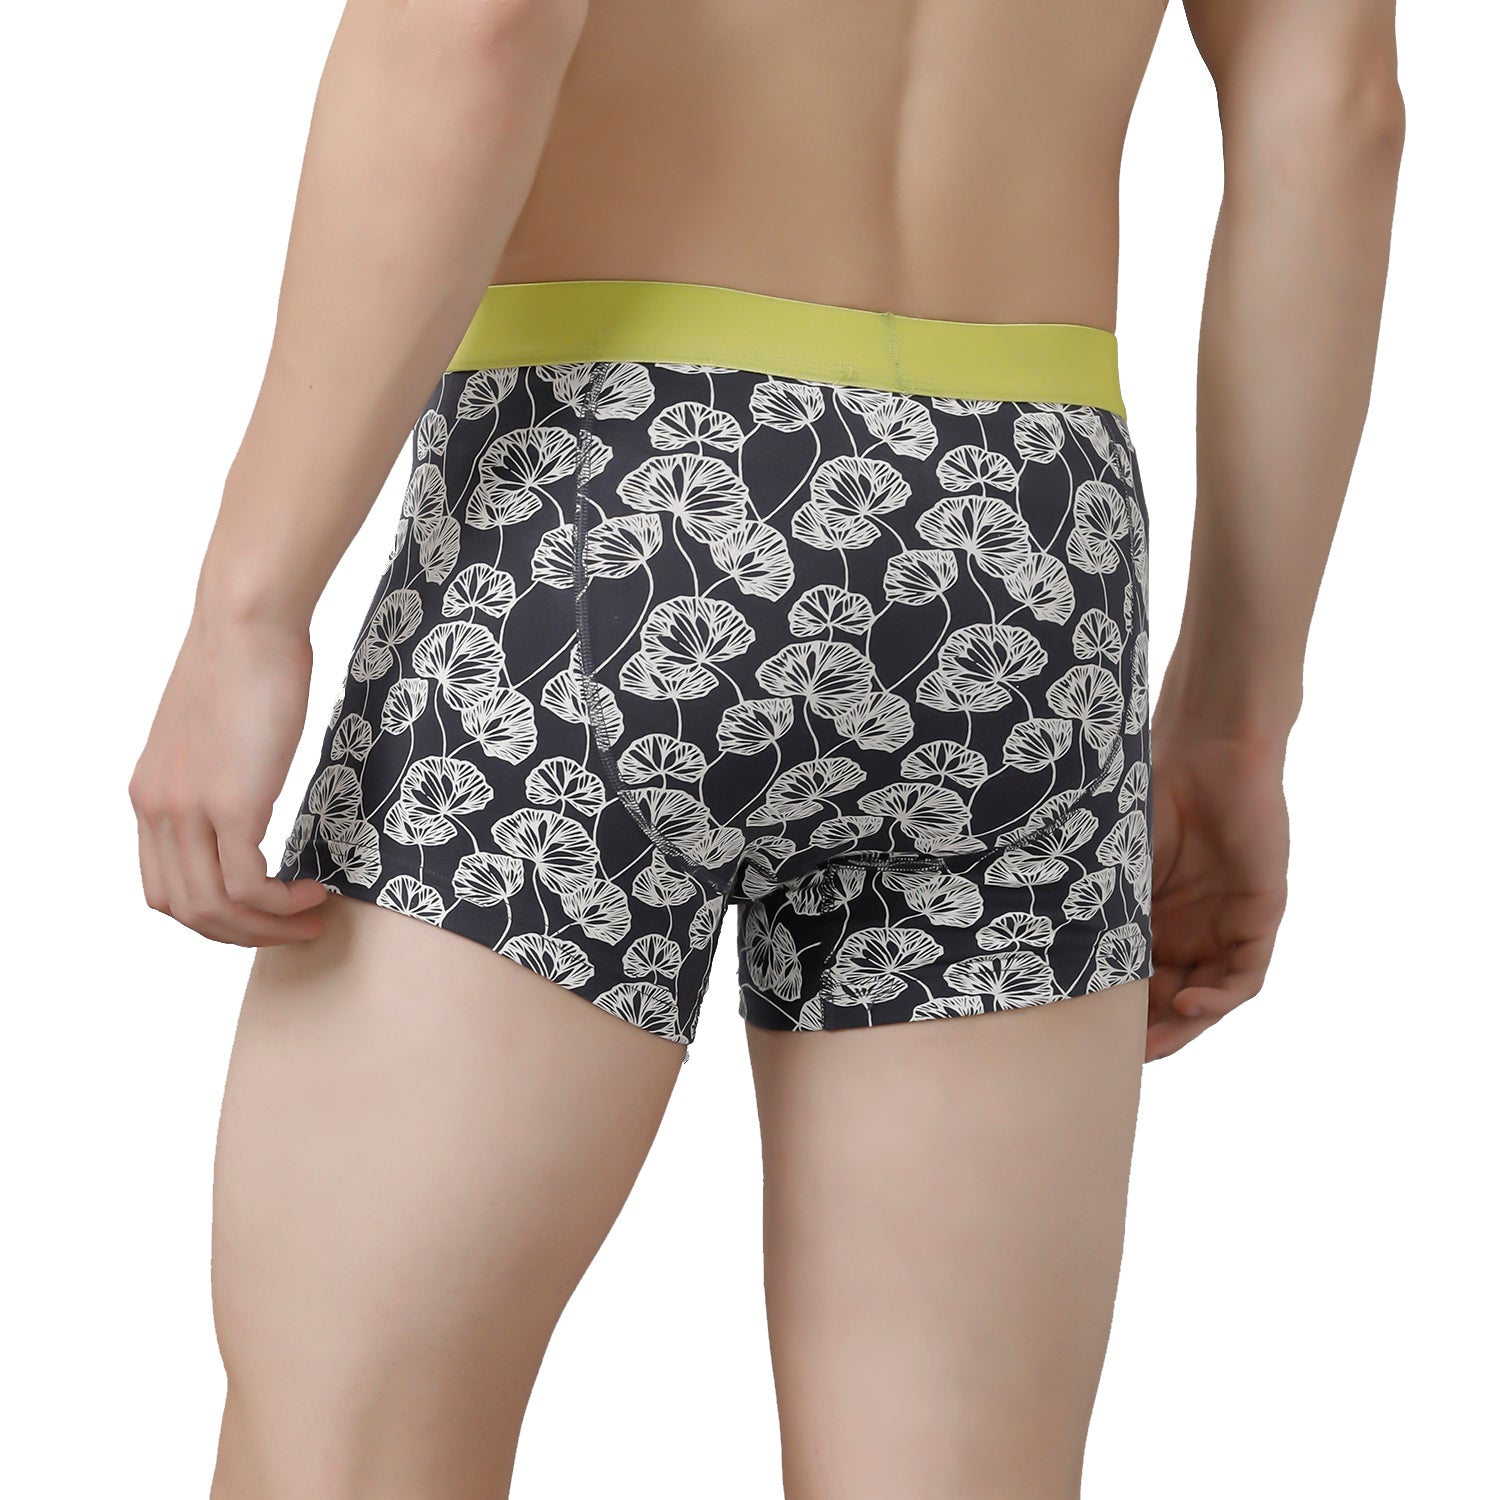 CP BRO Men's Printed Trunks with Exposed Waistband Value Pack - Grey Leaf & Grey Leaf (Pack of 2)